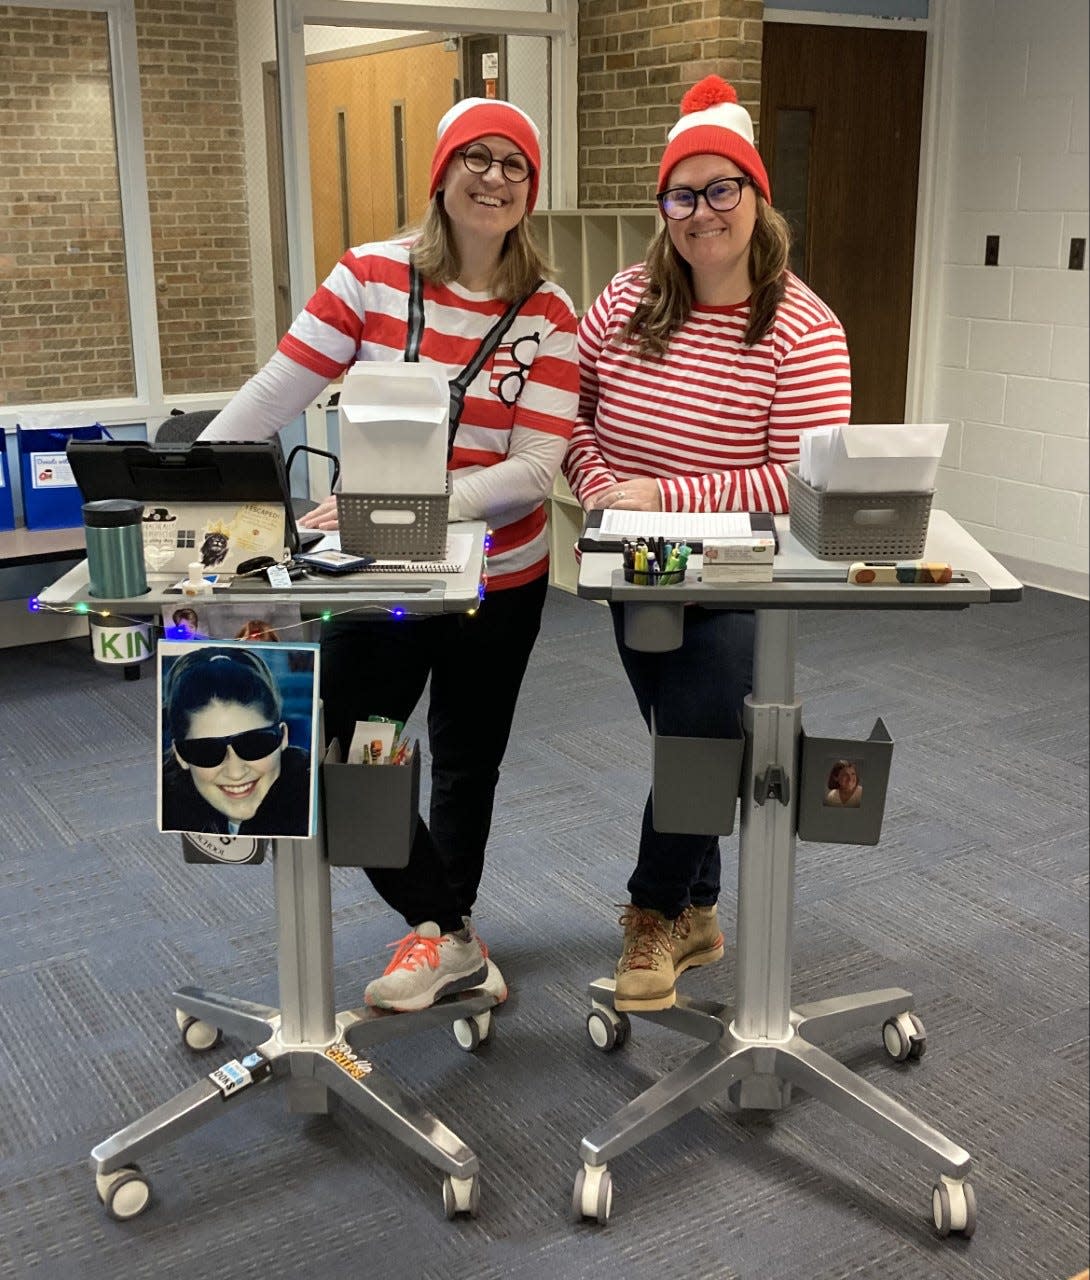 Teachers Samantha Fettig (left) and Jamie Whitley (right) dress as Wenda from the "Where's Waldo?" series for Way Back Wednesday at Petoskey High School. On Wednesdays, faculty dress as Waldo or Wenda and students can find them to voluntarily give them their cell phones. Their phones are kept in the office throughout the day.